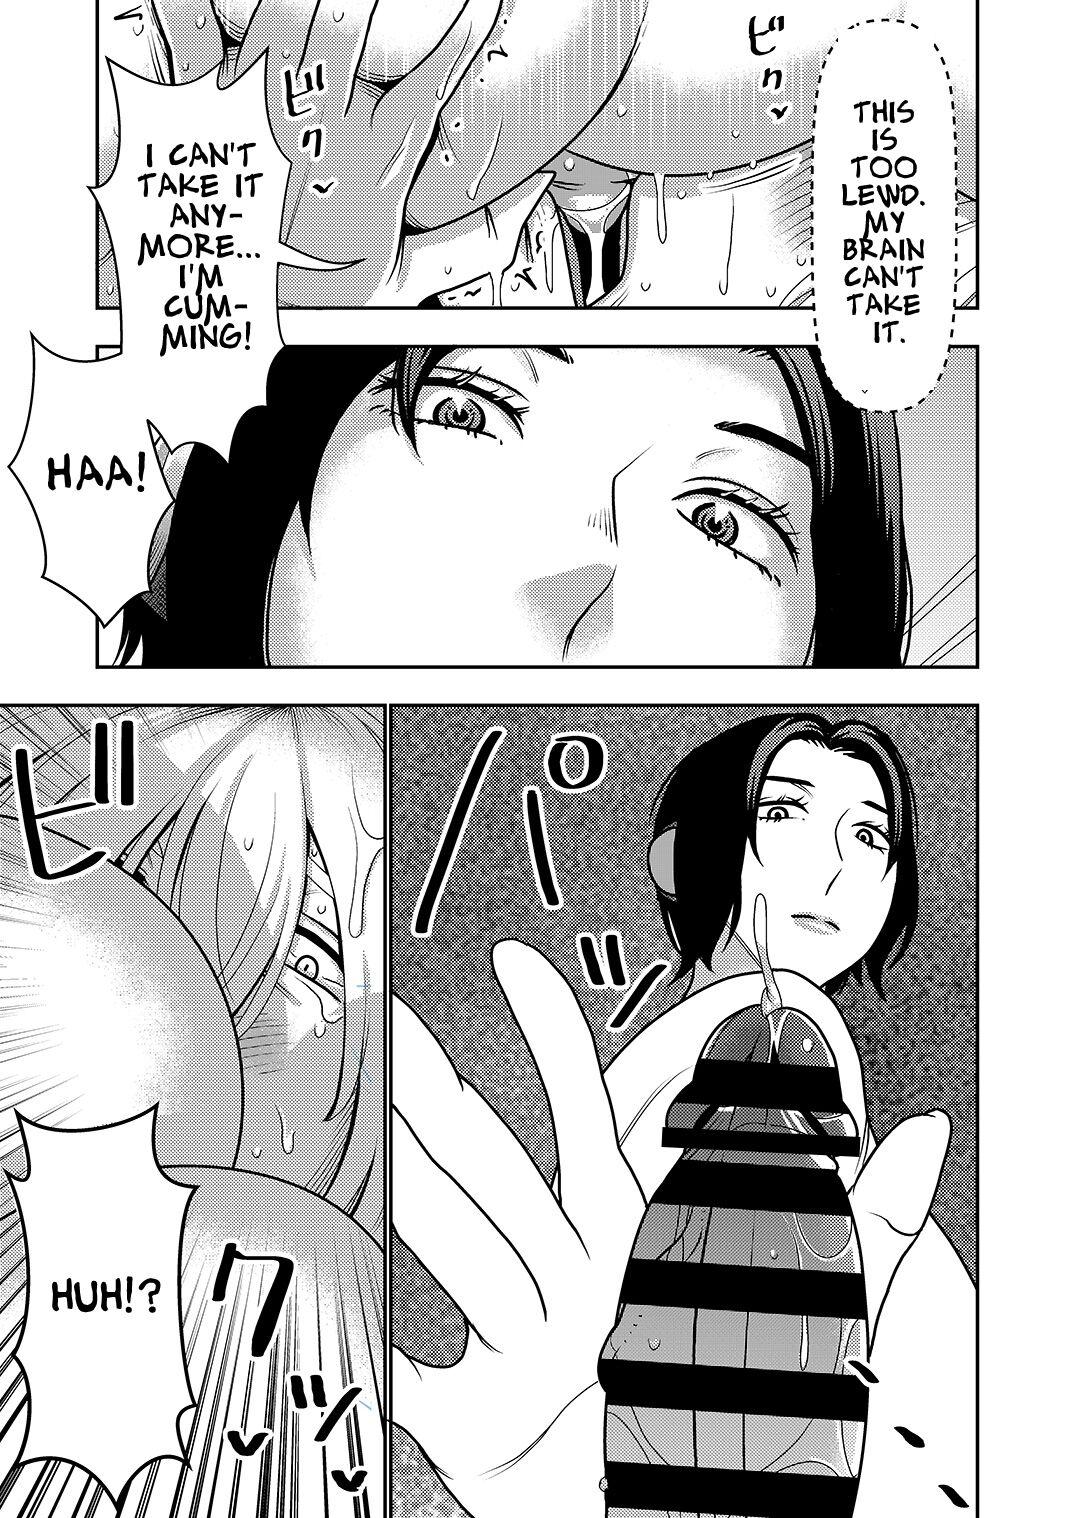 Rough Sex This Defective Sexaroid is TOO LEWD, so I'm thinking of returning it! - Original Amature Allure - Page 11